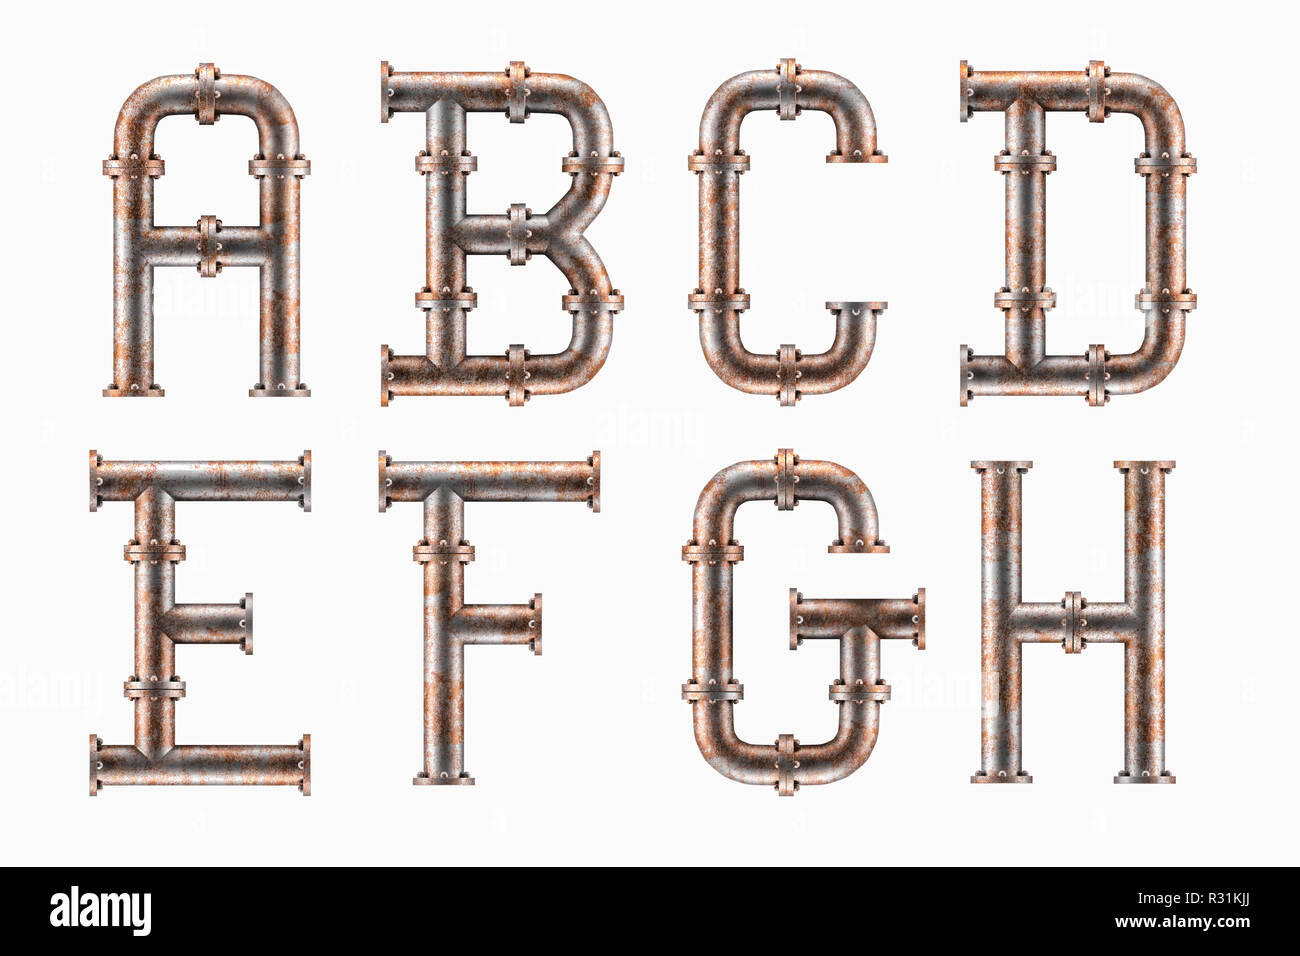 Alphabet made of rusty metal piping elements - letters A to H Stock Photo